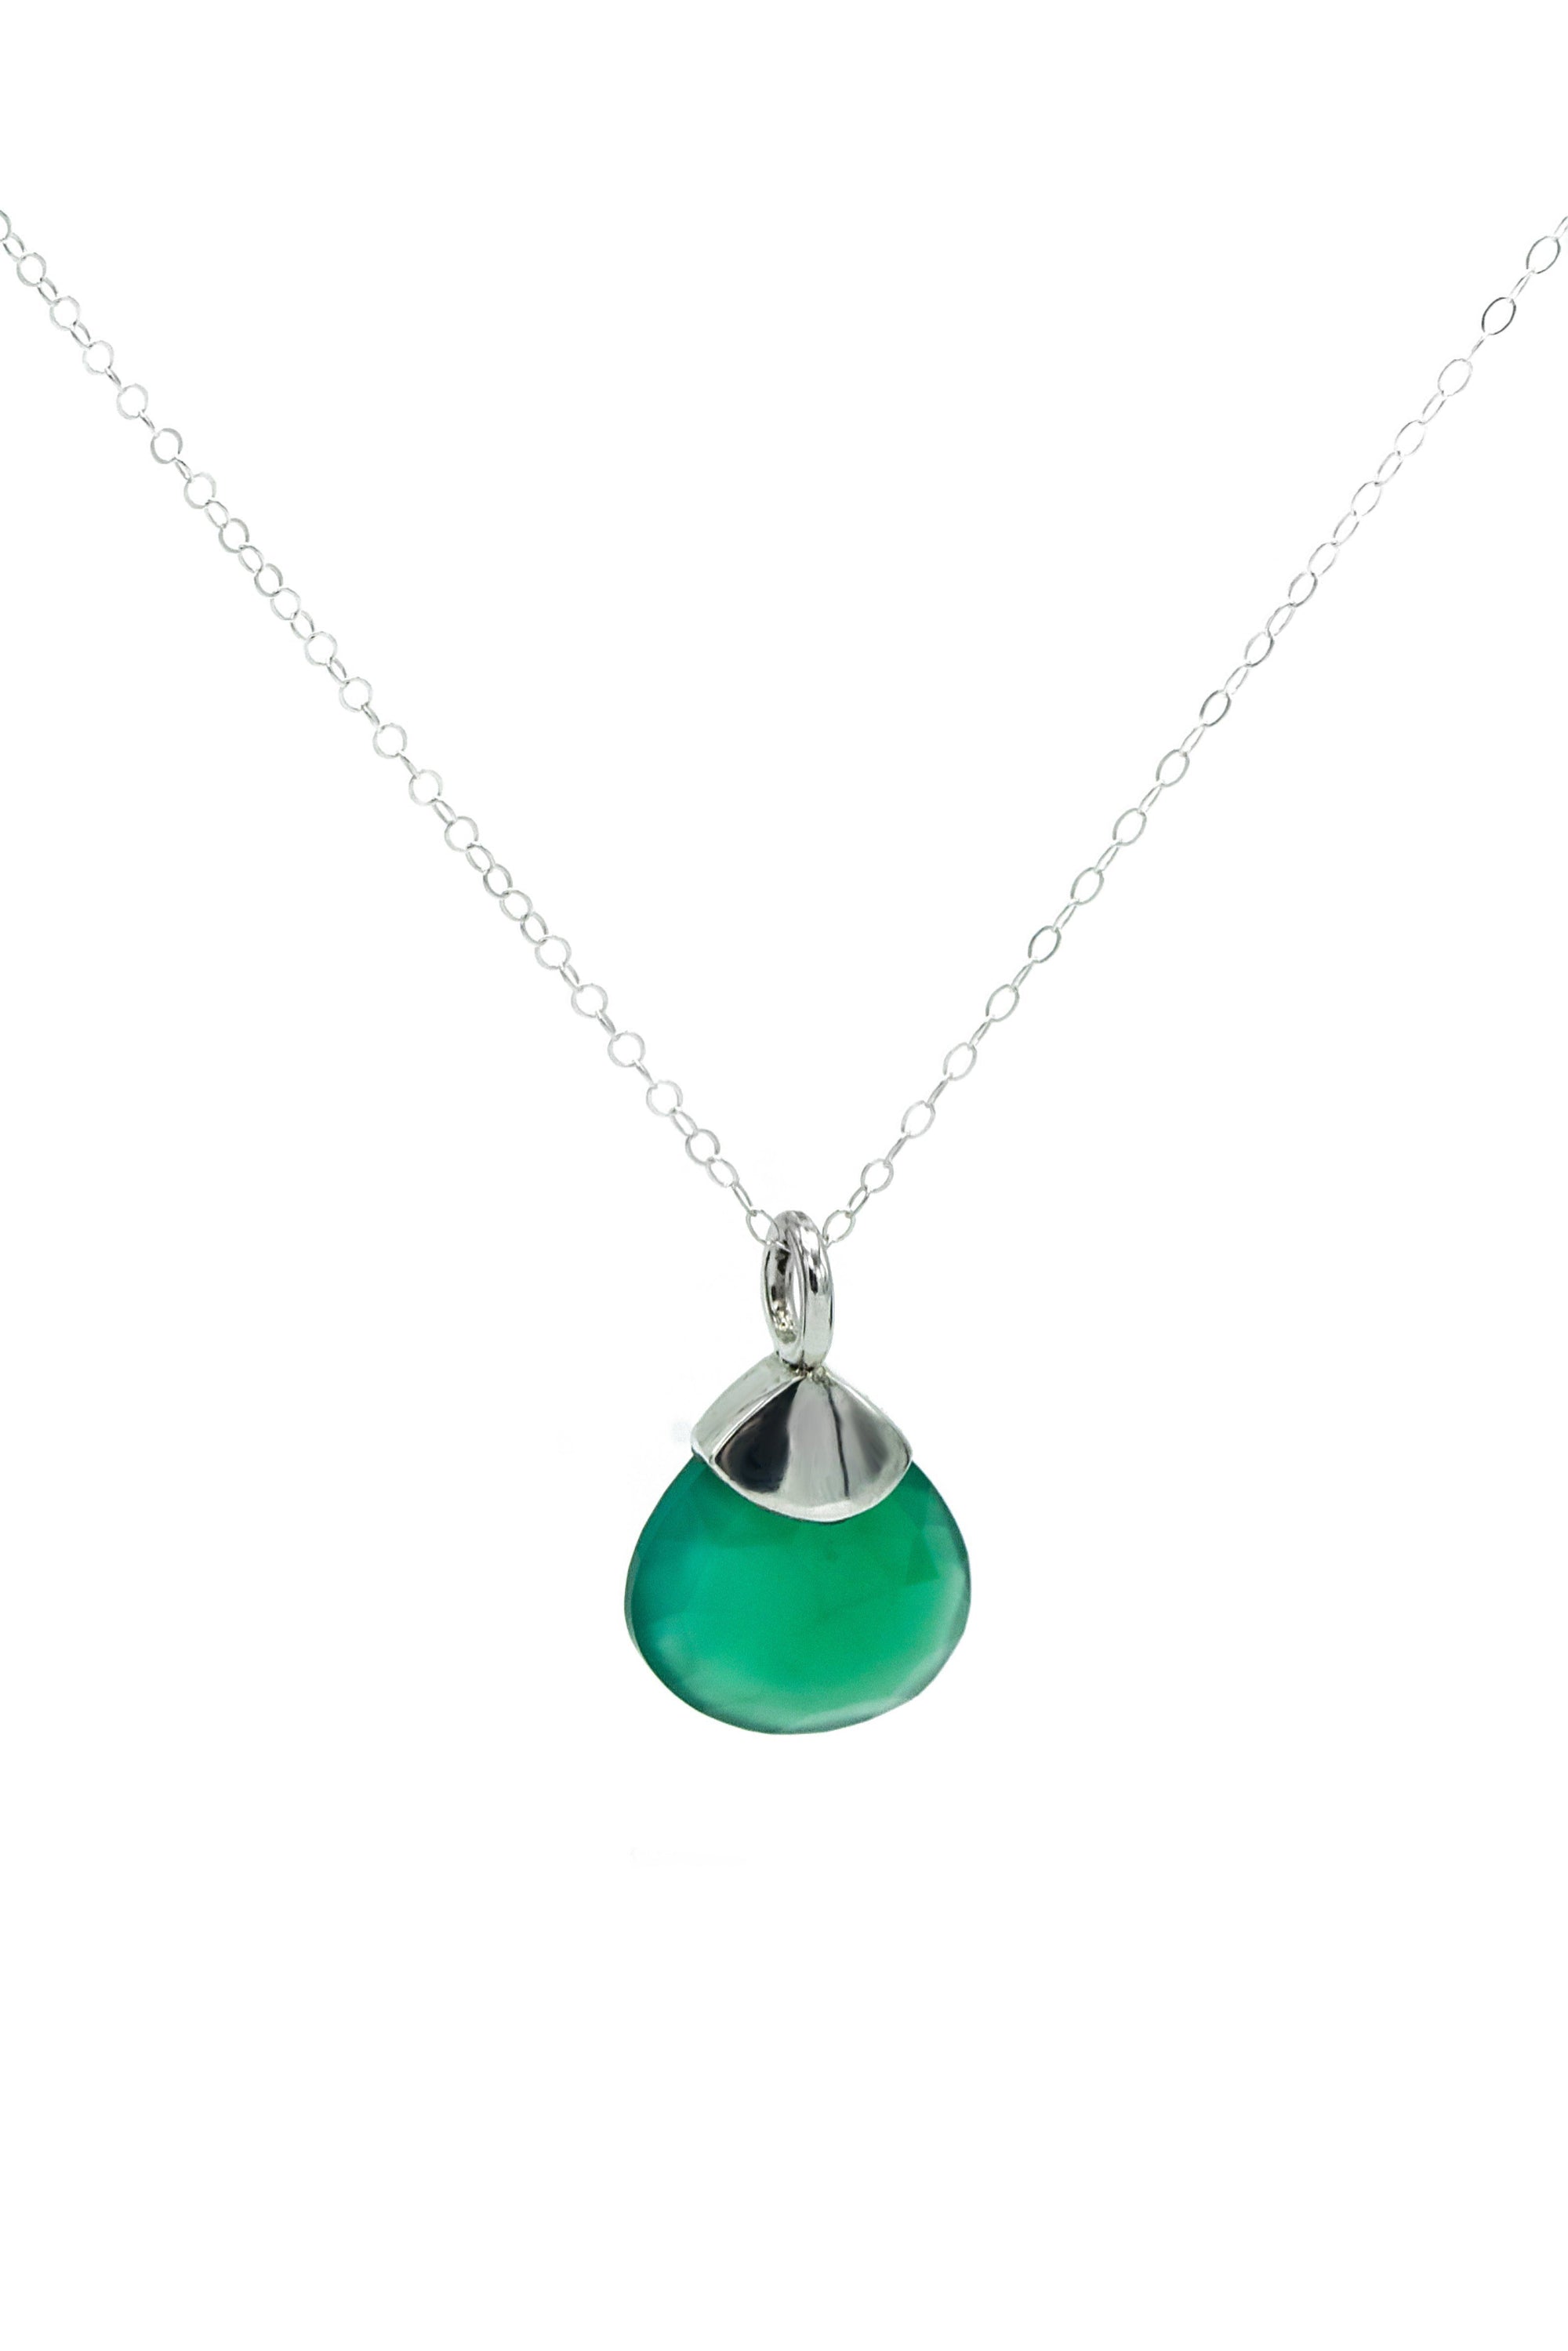 Buy Green Onyx Drop Pendant Necklace Online - Handcrafted Jewelry Store ...